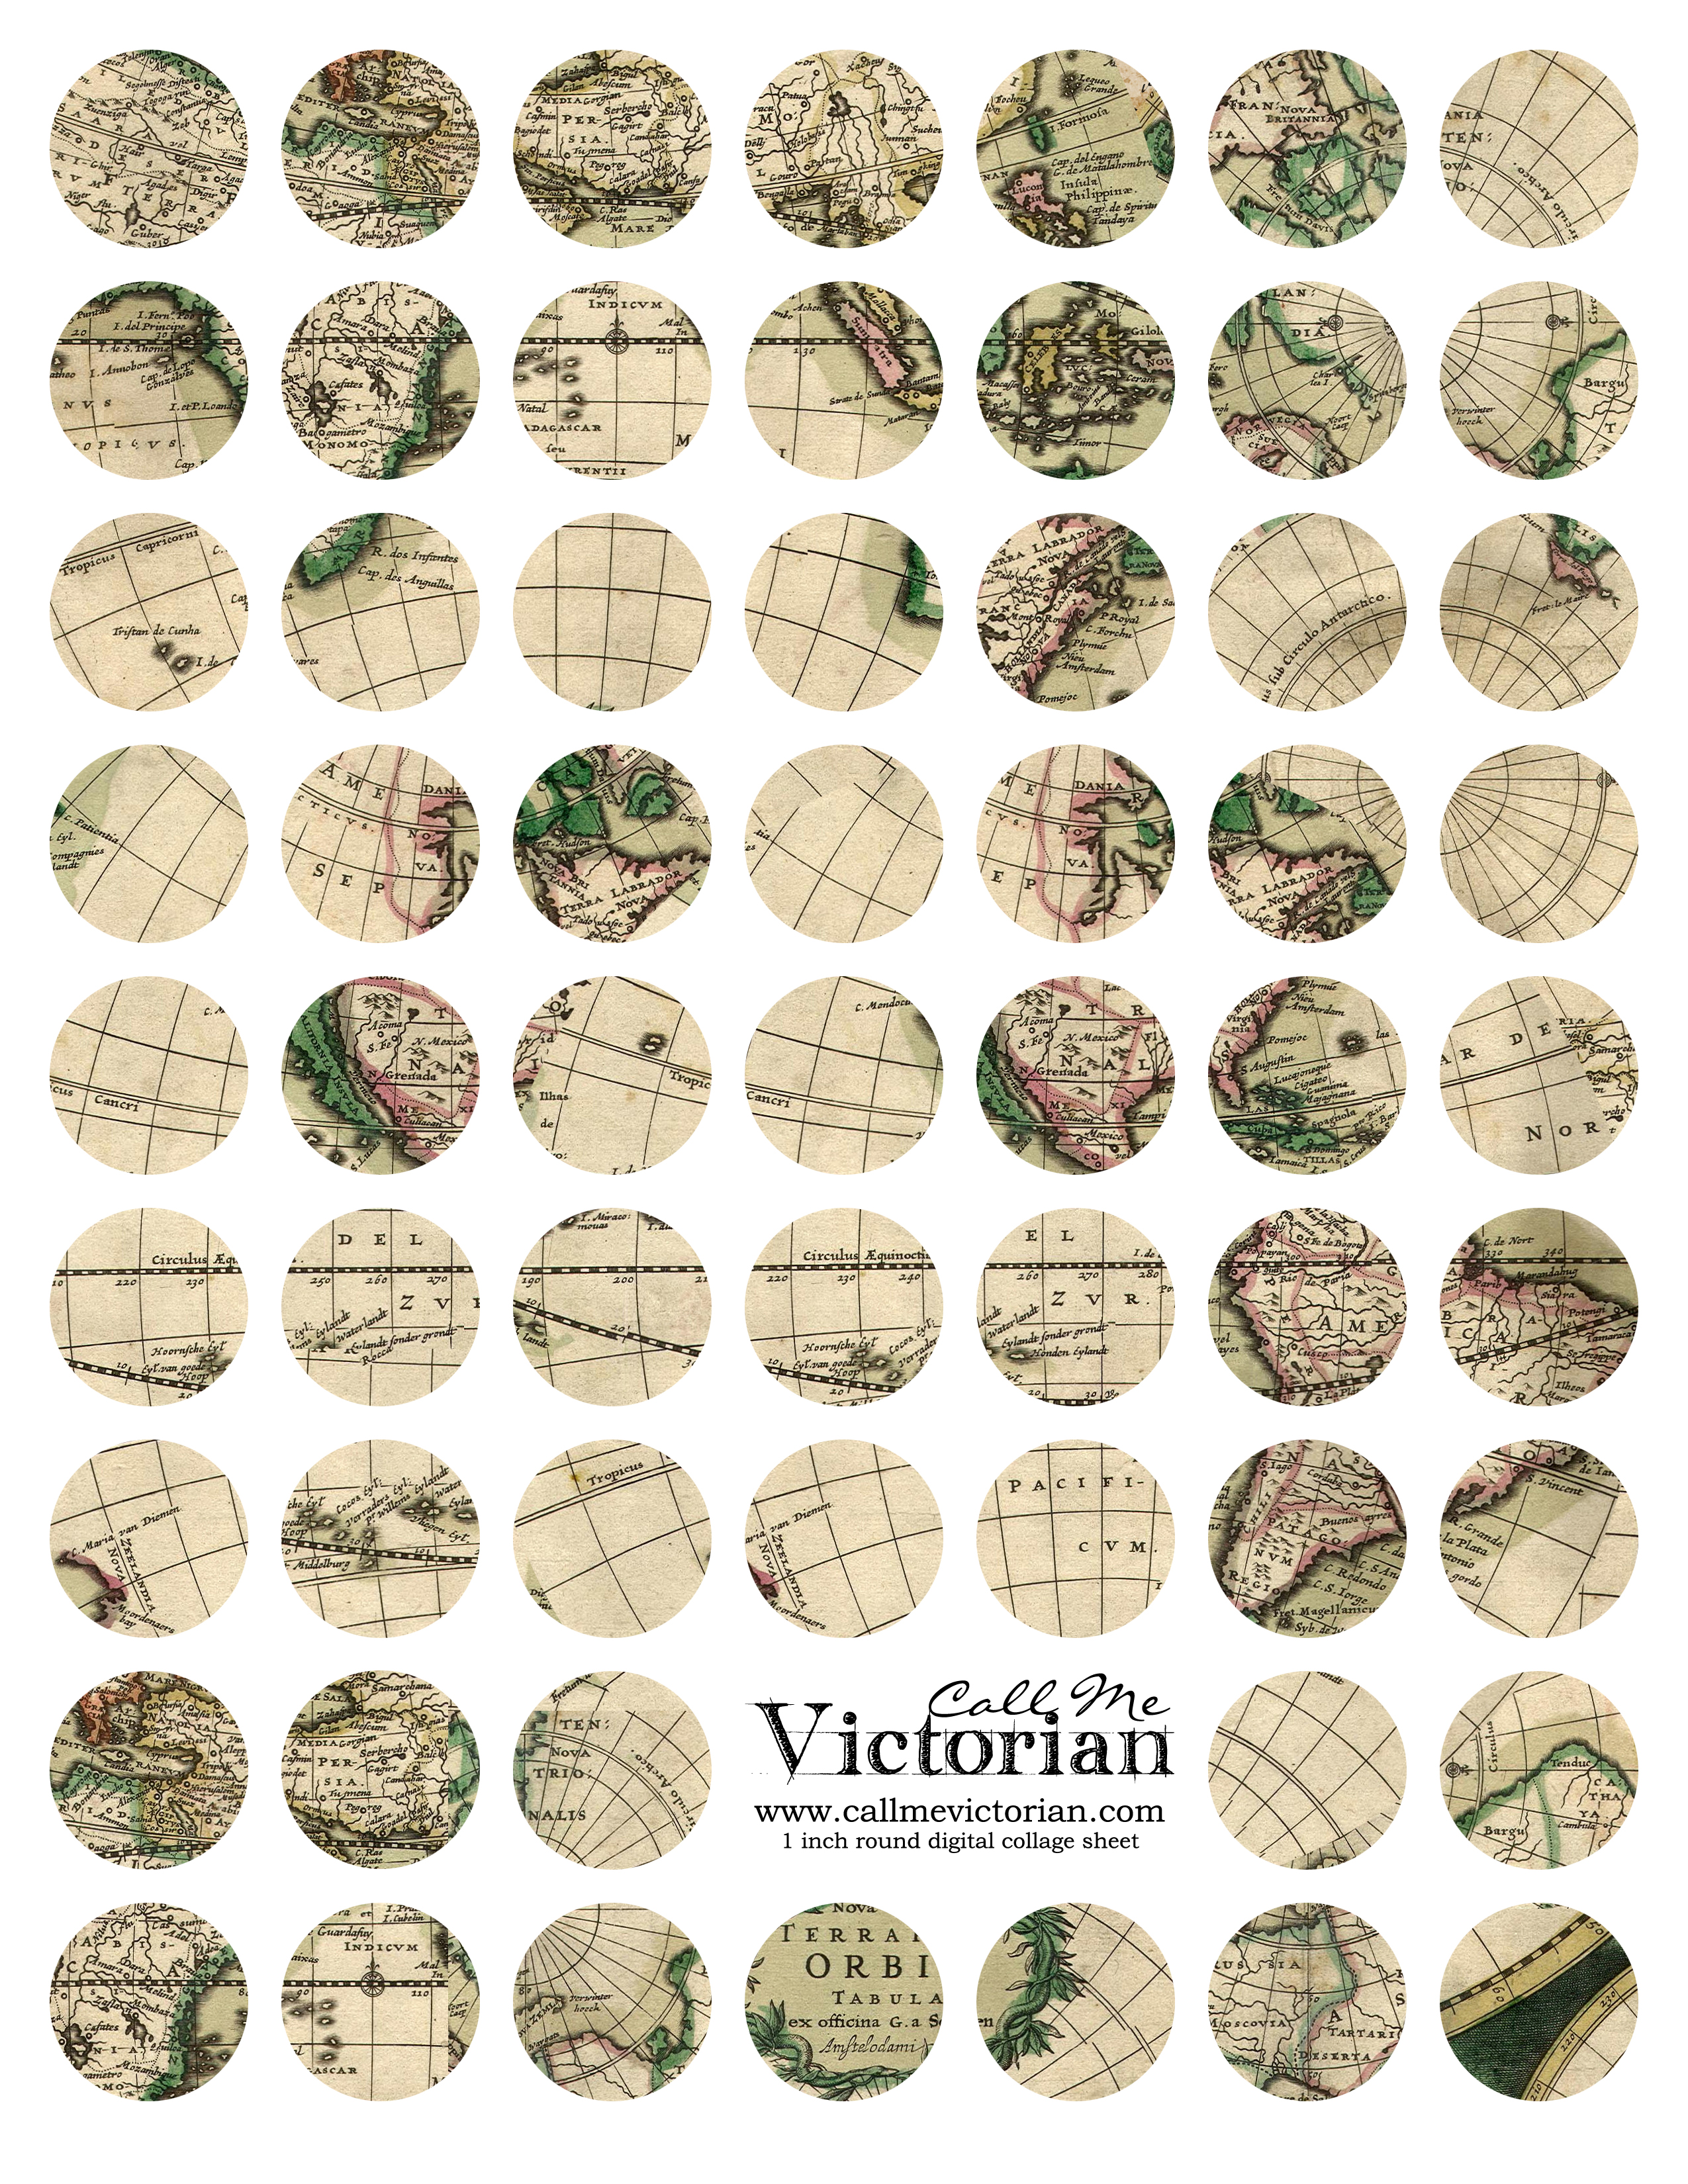 Free Digital Collage Sheet Vintage Maps Call Me Victorian